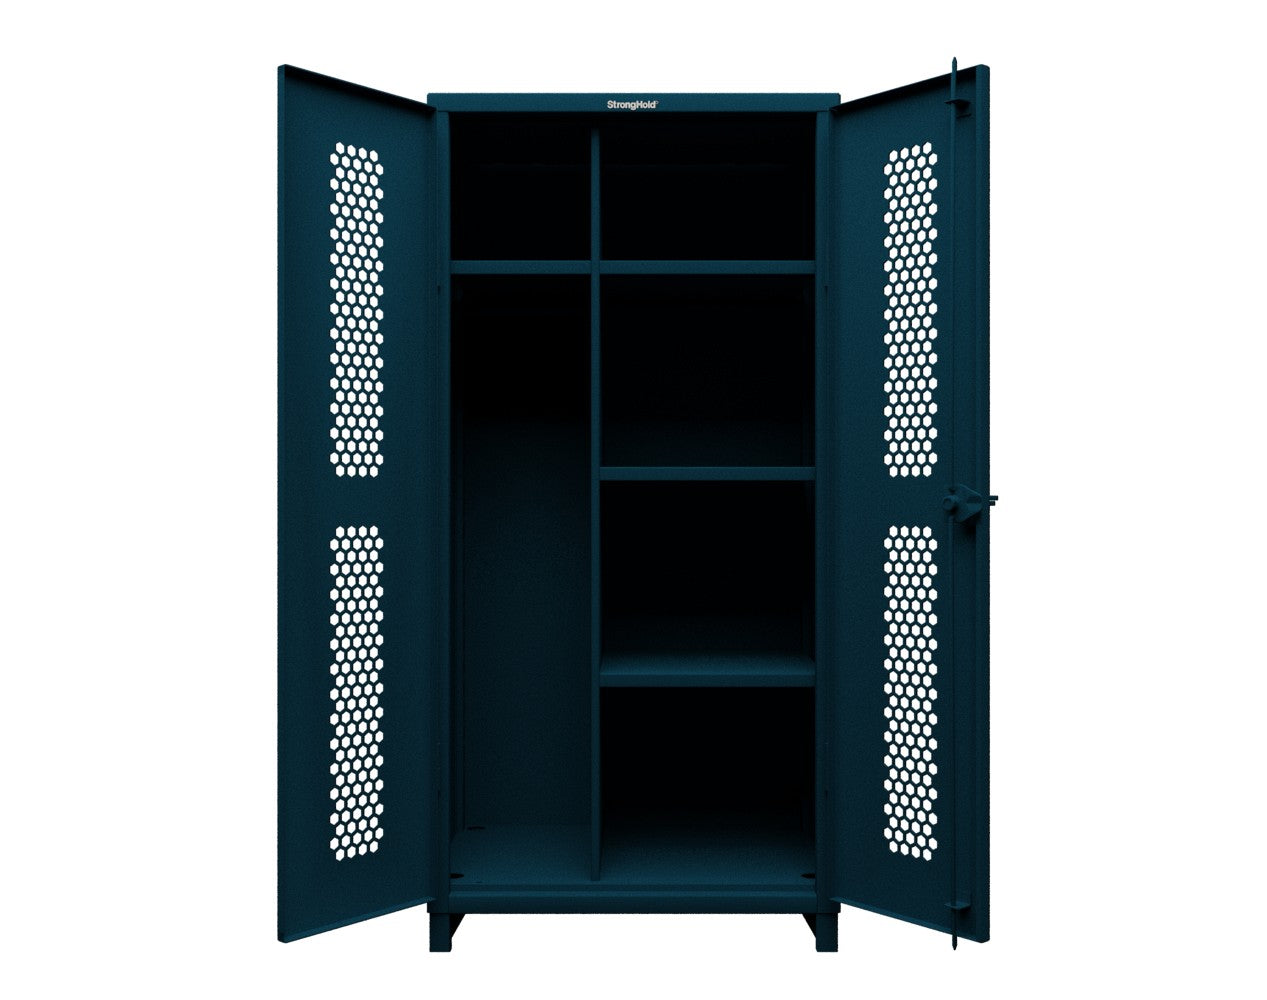 Extra Heavy Duty 14 GA Ventilated (Hex) Uniform Cabinet with 4 Shelves - 36 In. W x 24 In. D x 75 In. H